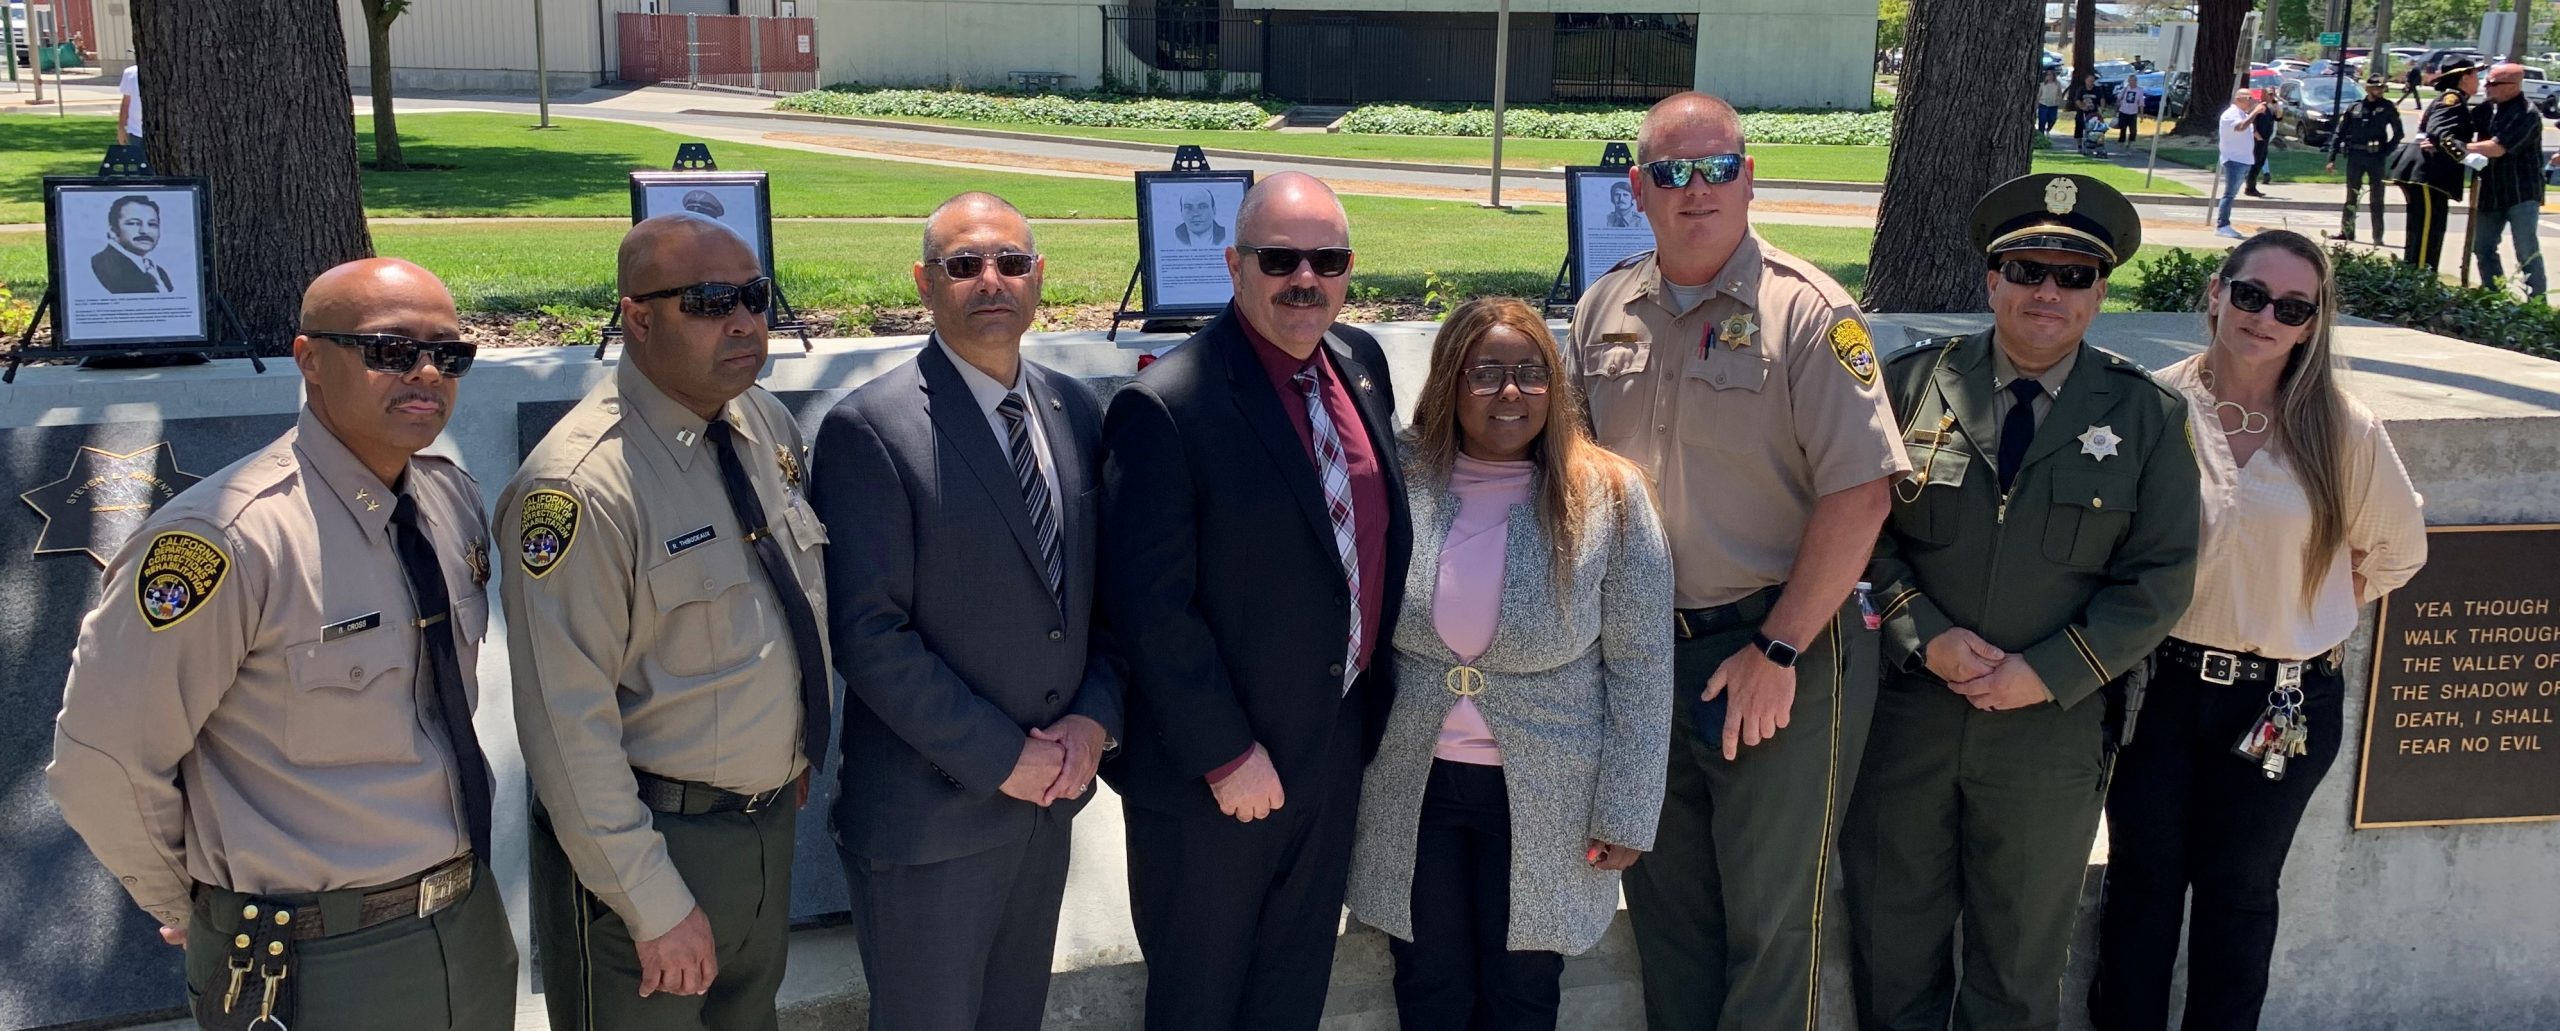 California State Prison, Solano, staff at peace officer memorial ceremony.